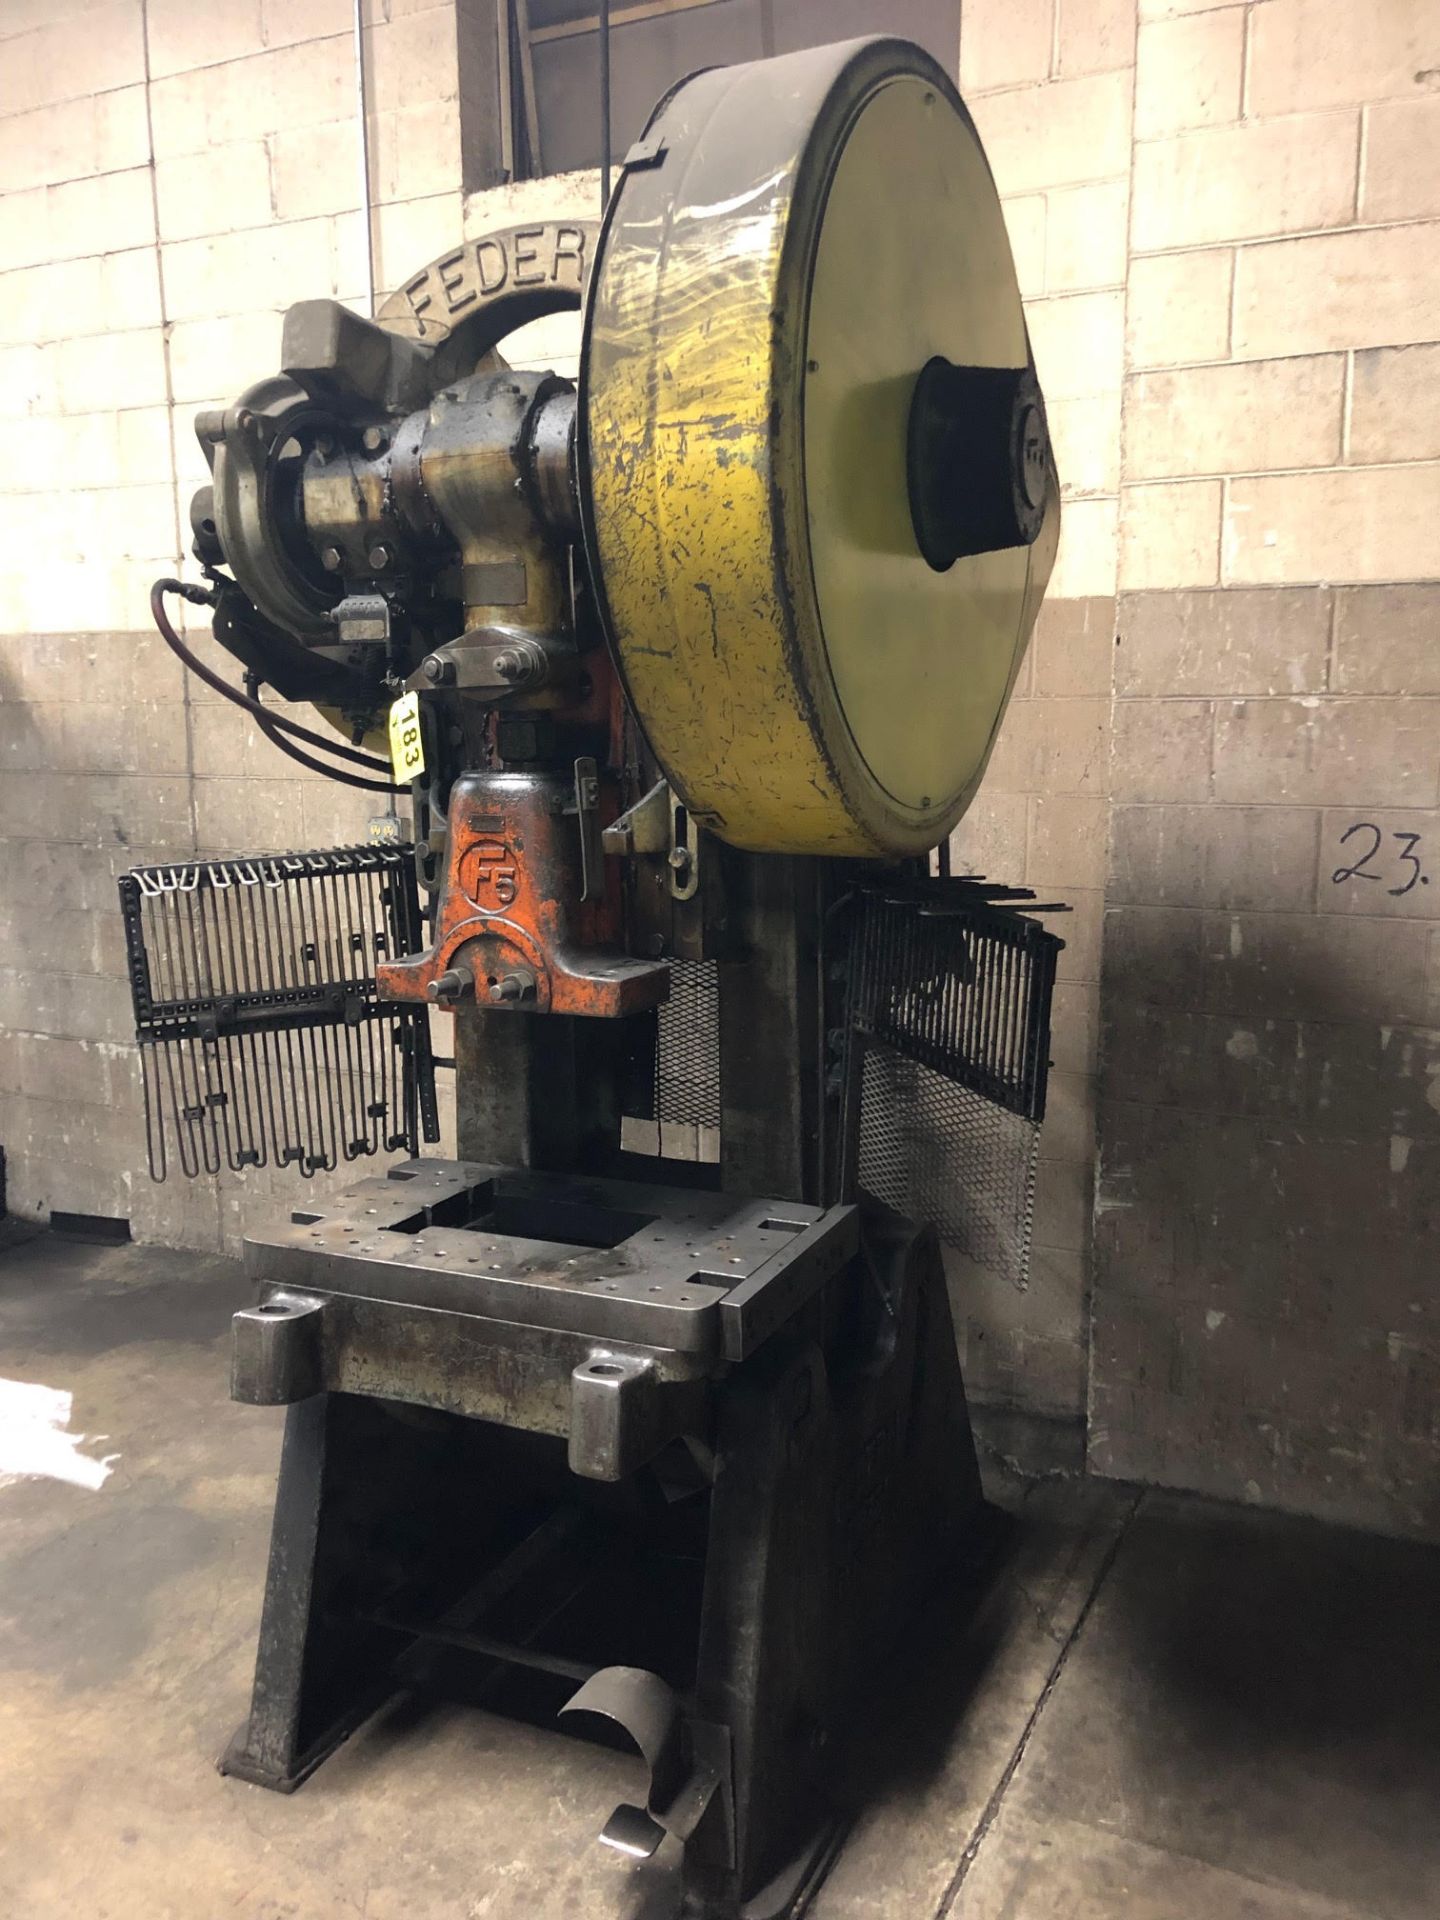 Federal F5 Back Geared OBI Punch Press, 55 Ton - 4" Stroke - 12 1/2" Shut Height - 18 1/2" x 29 1/2" - Image 5 of 10